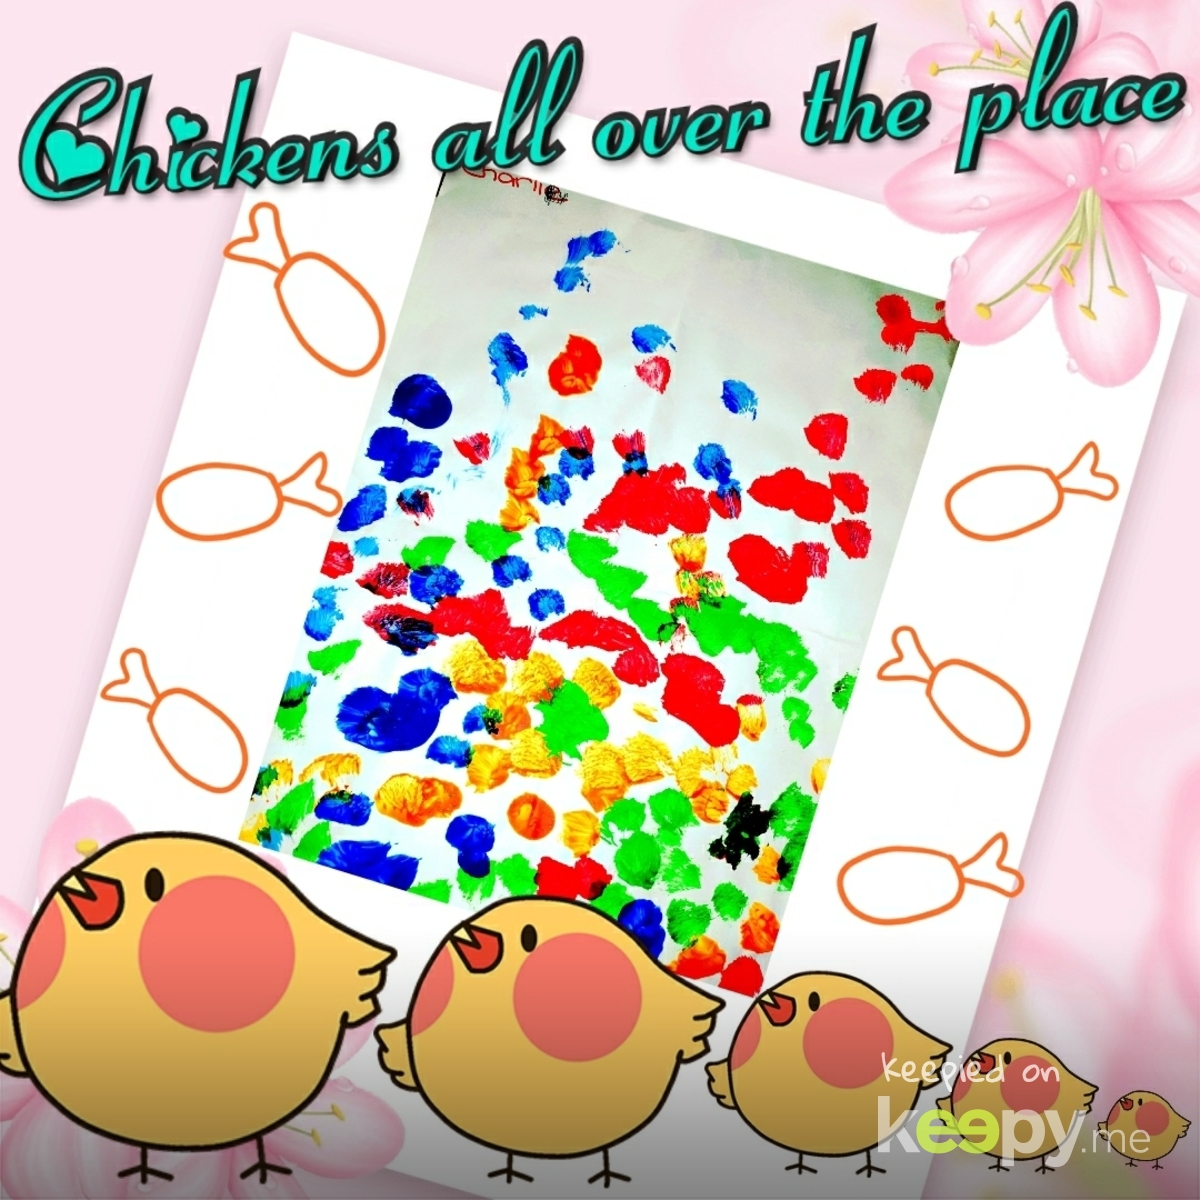 Charli's painting of "Chickens all over the place" Hmmmm Okay Bubba, If you say so!